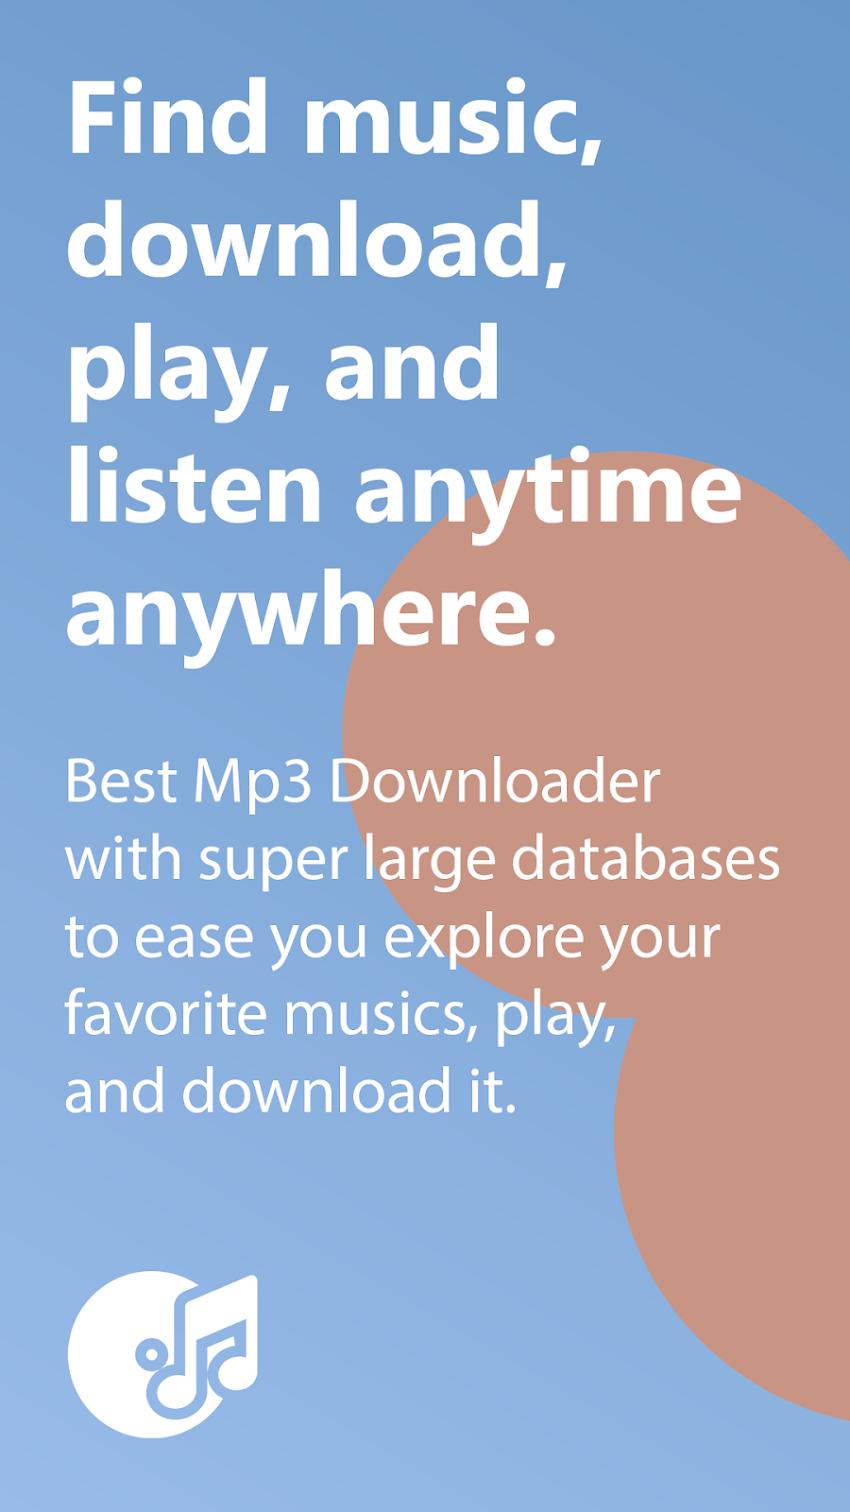 Free Music - MP3 Downloader MP3 YT for Android - APK Download